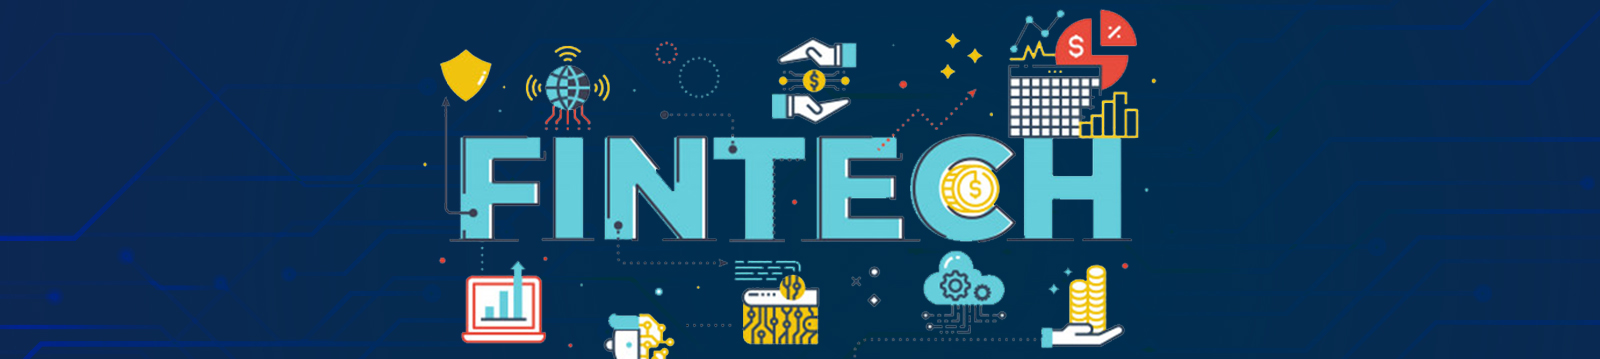 FinTech App Development – 7 Critical Things You Must Know About